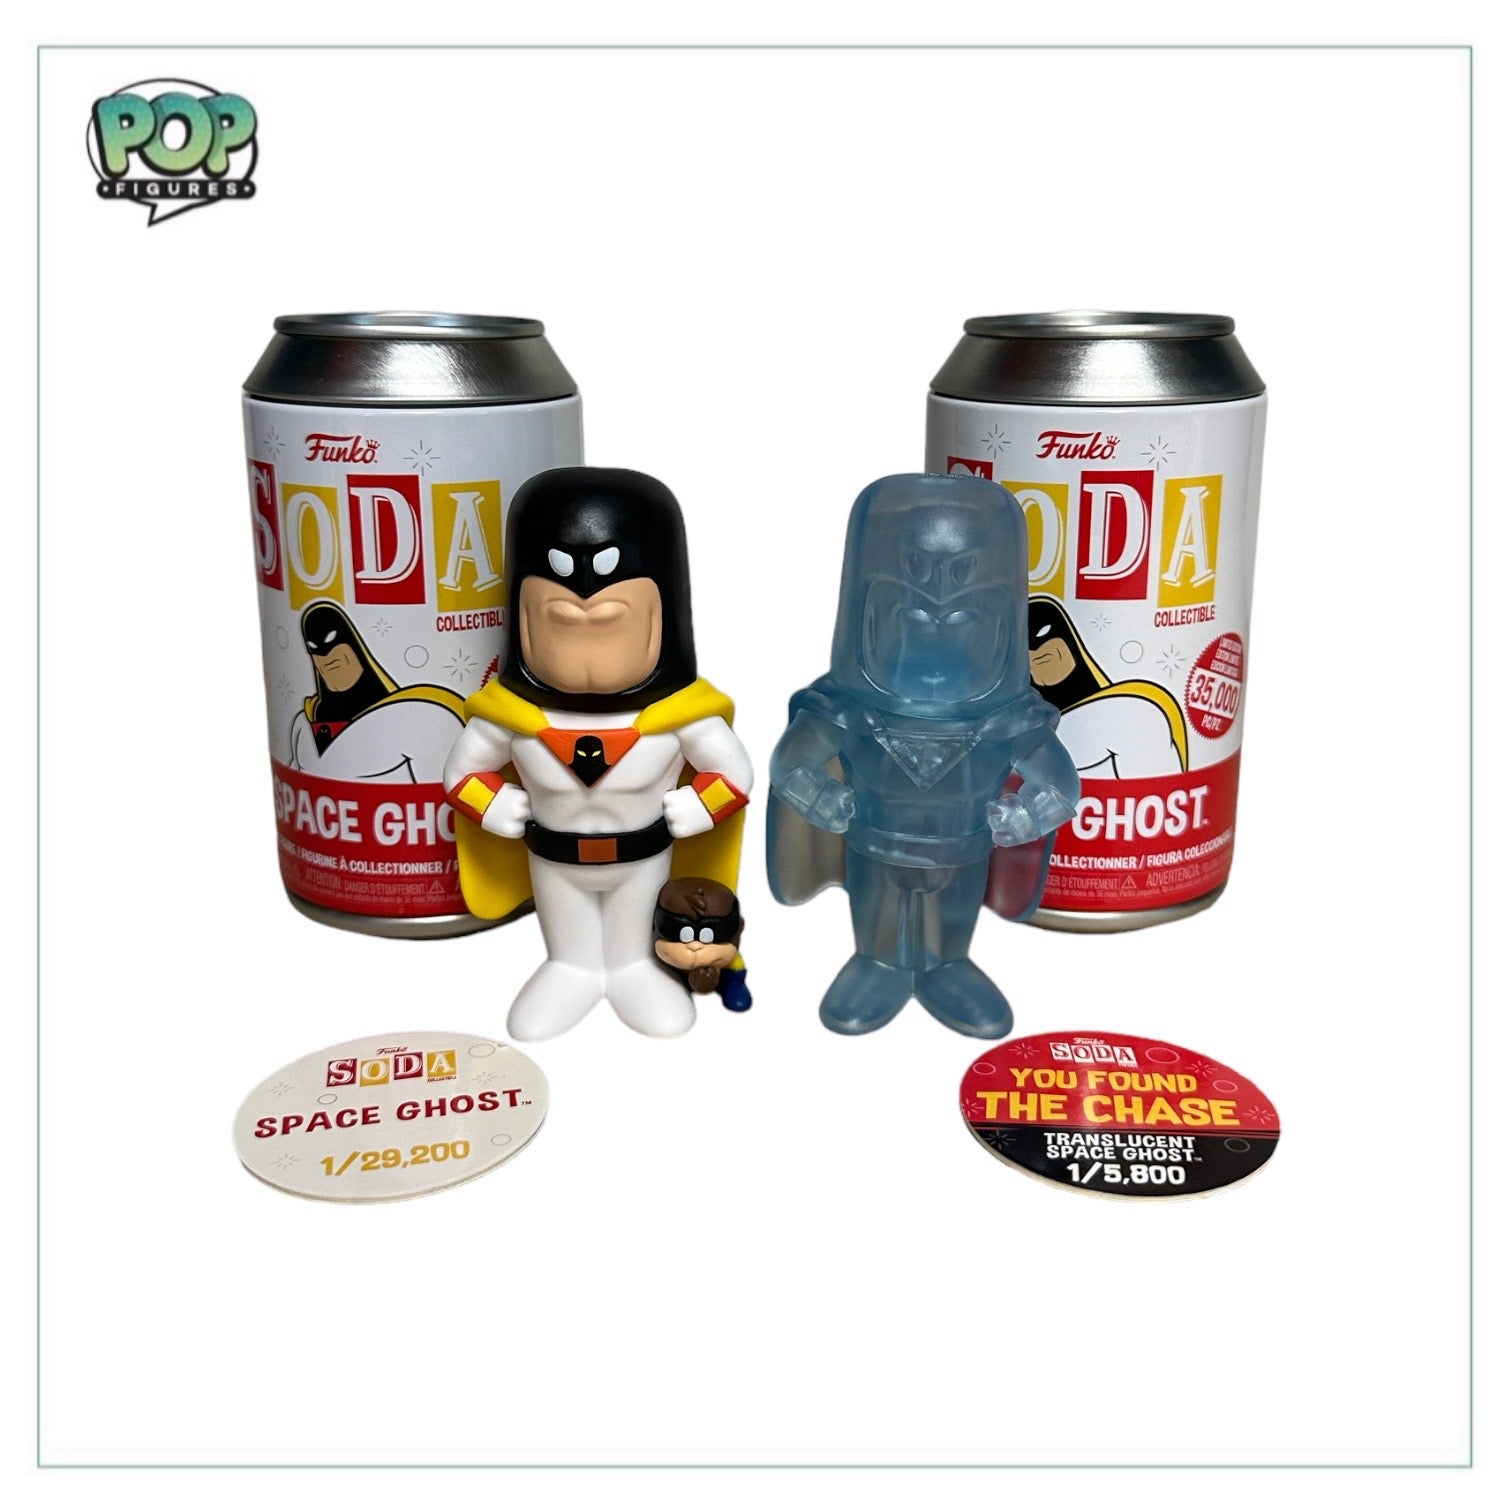 Space Ghost Common & Translucent Chase Funko Soda Vinyl Figure - Space Ghost - Fun on the Run Online Exclusive LE1/29200 & LE1/5800 Pcs